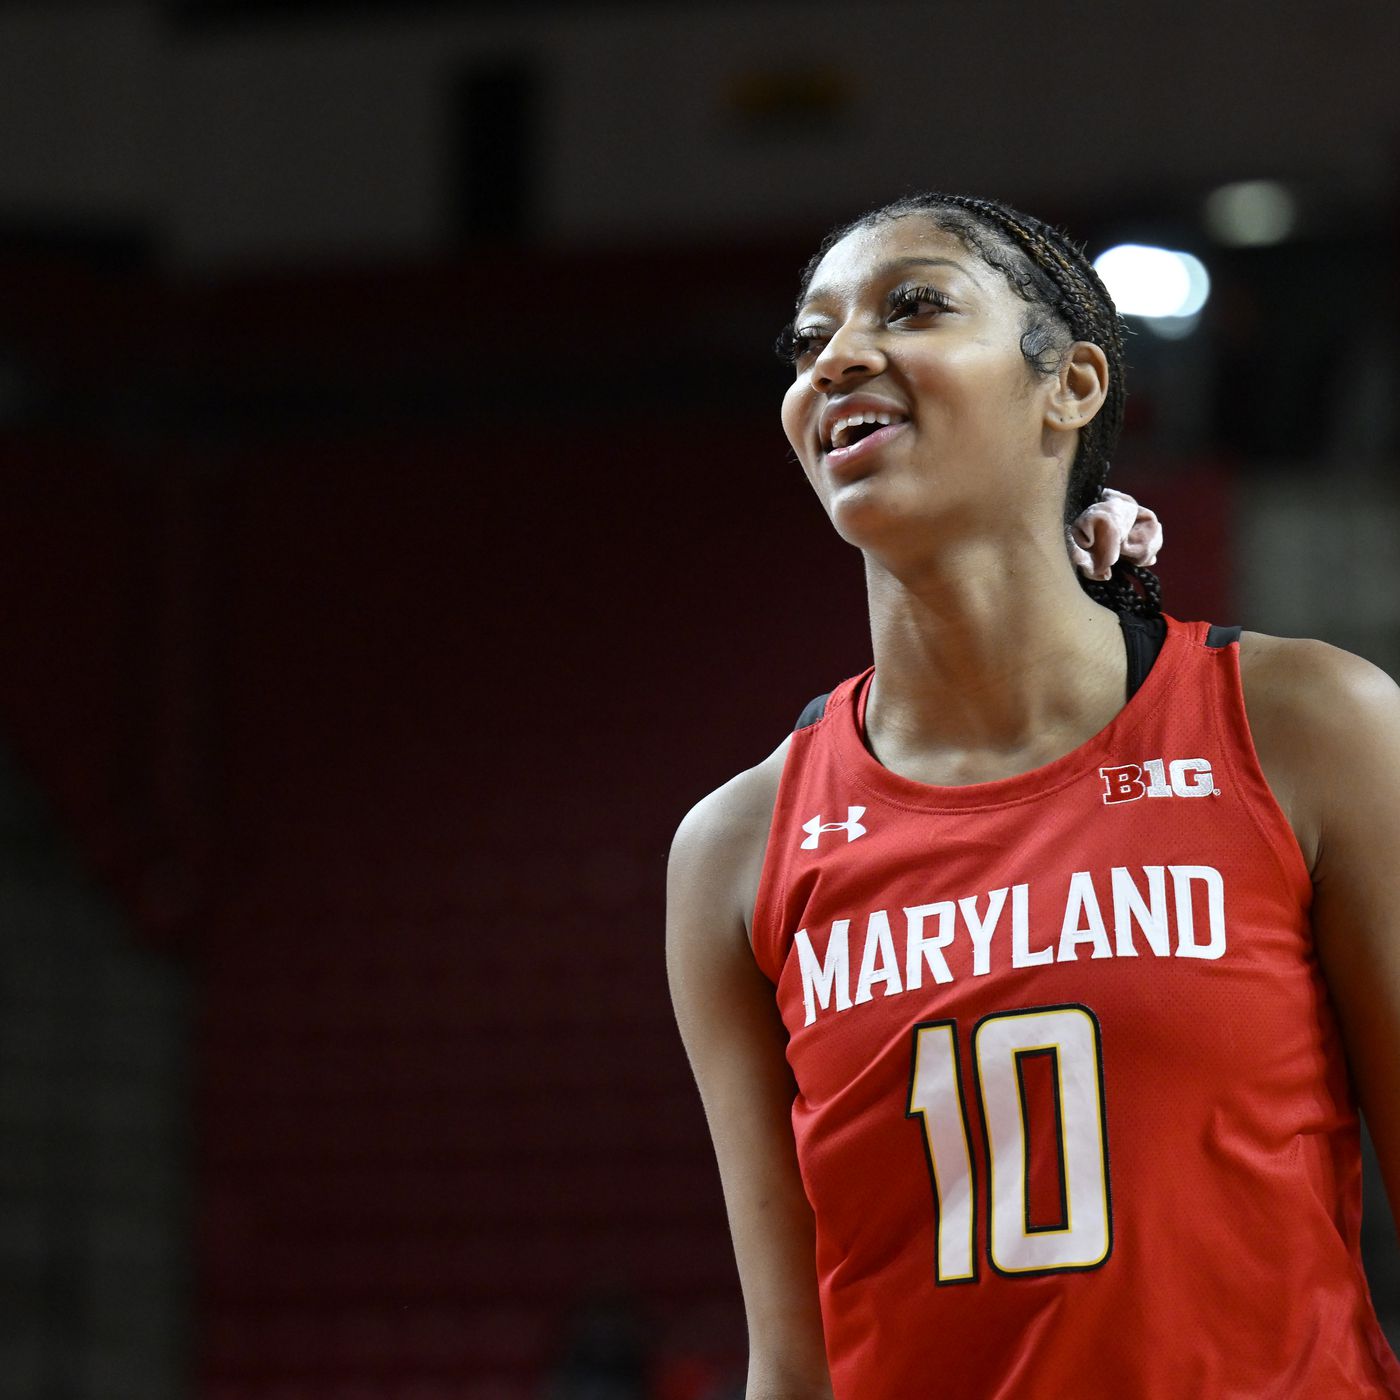 Maryland women's basketball's Angel Reese excels on the court and uses music as motivation